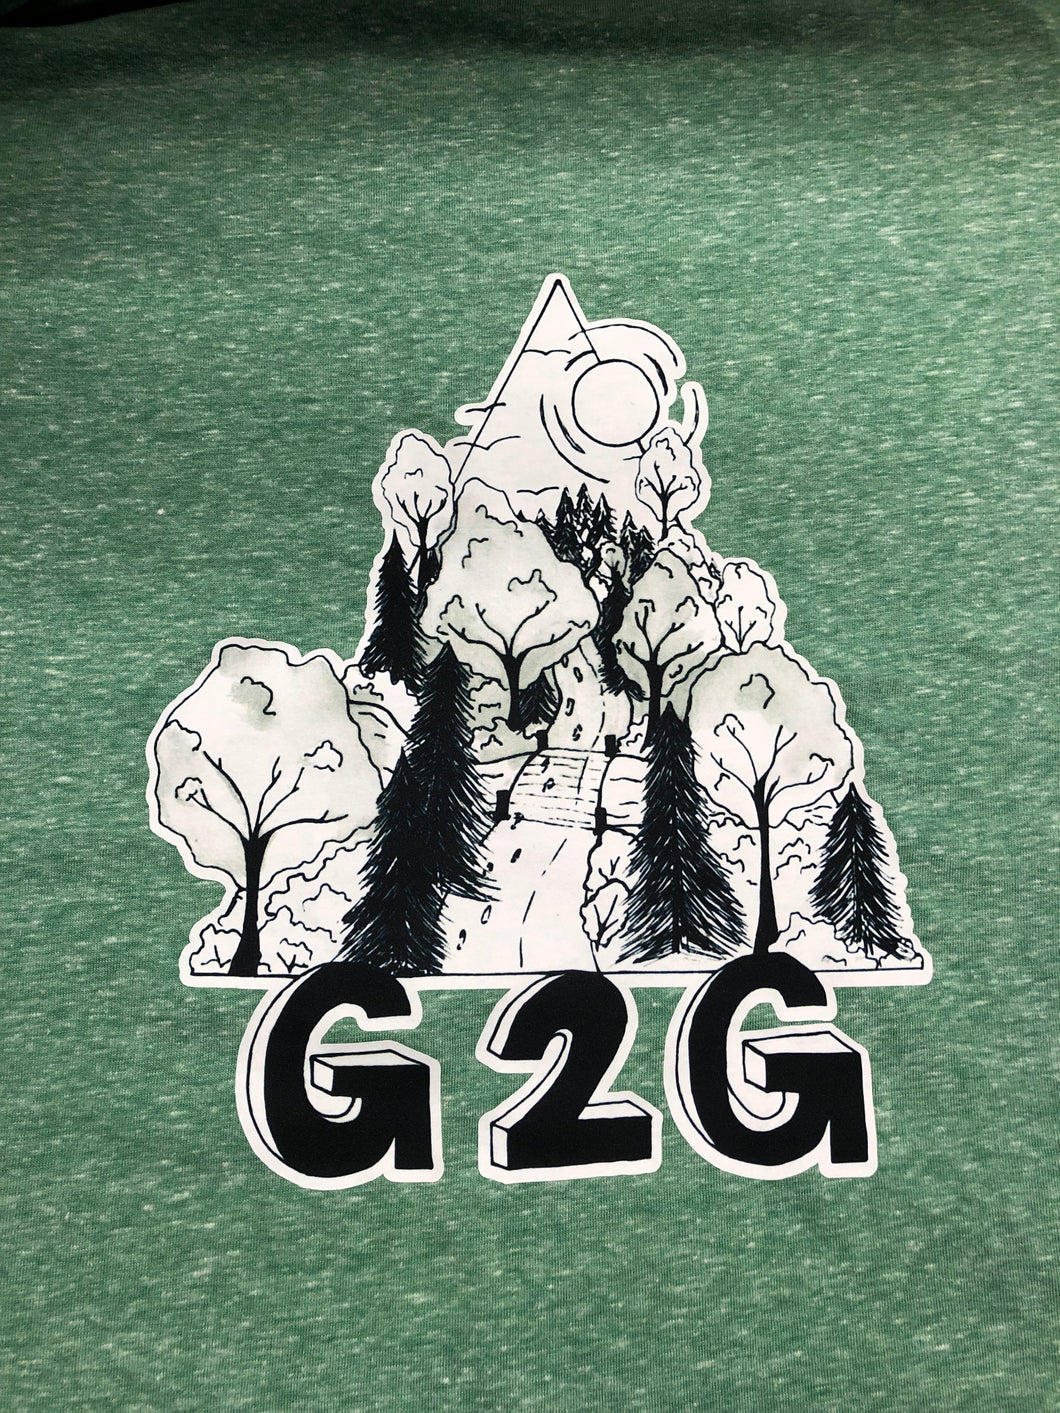 Men’s T-shirt to Raise Funds for G2G - Green